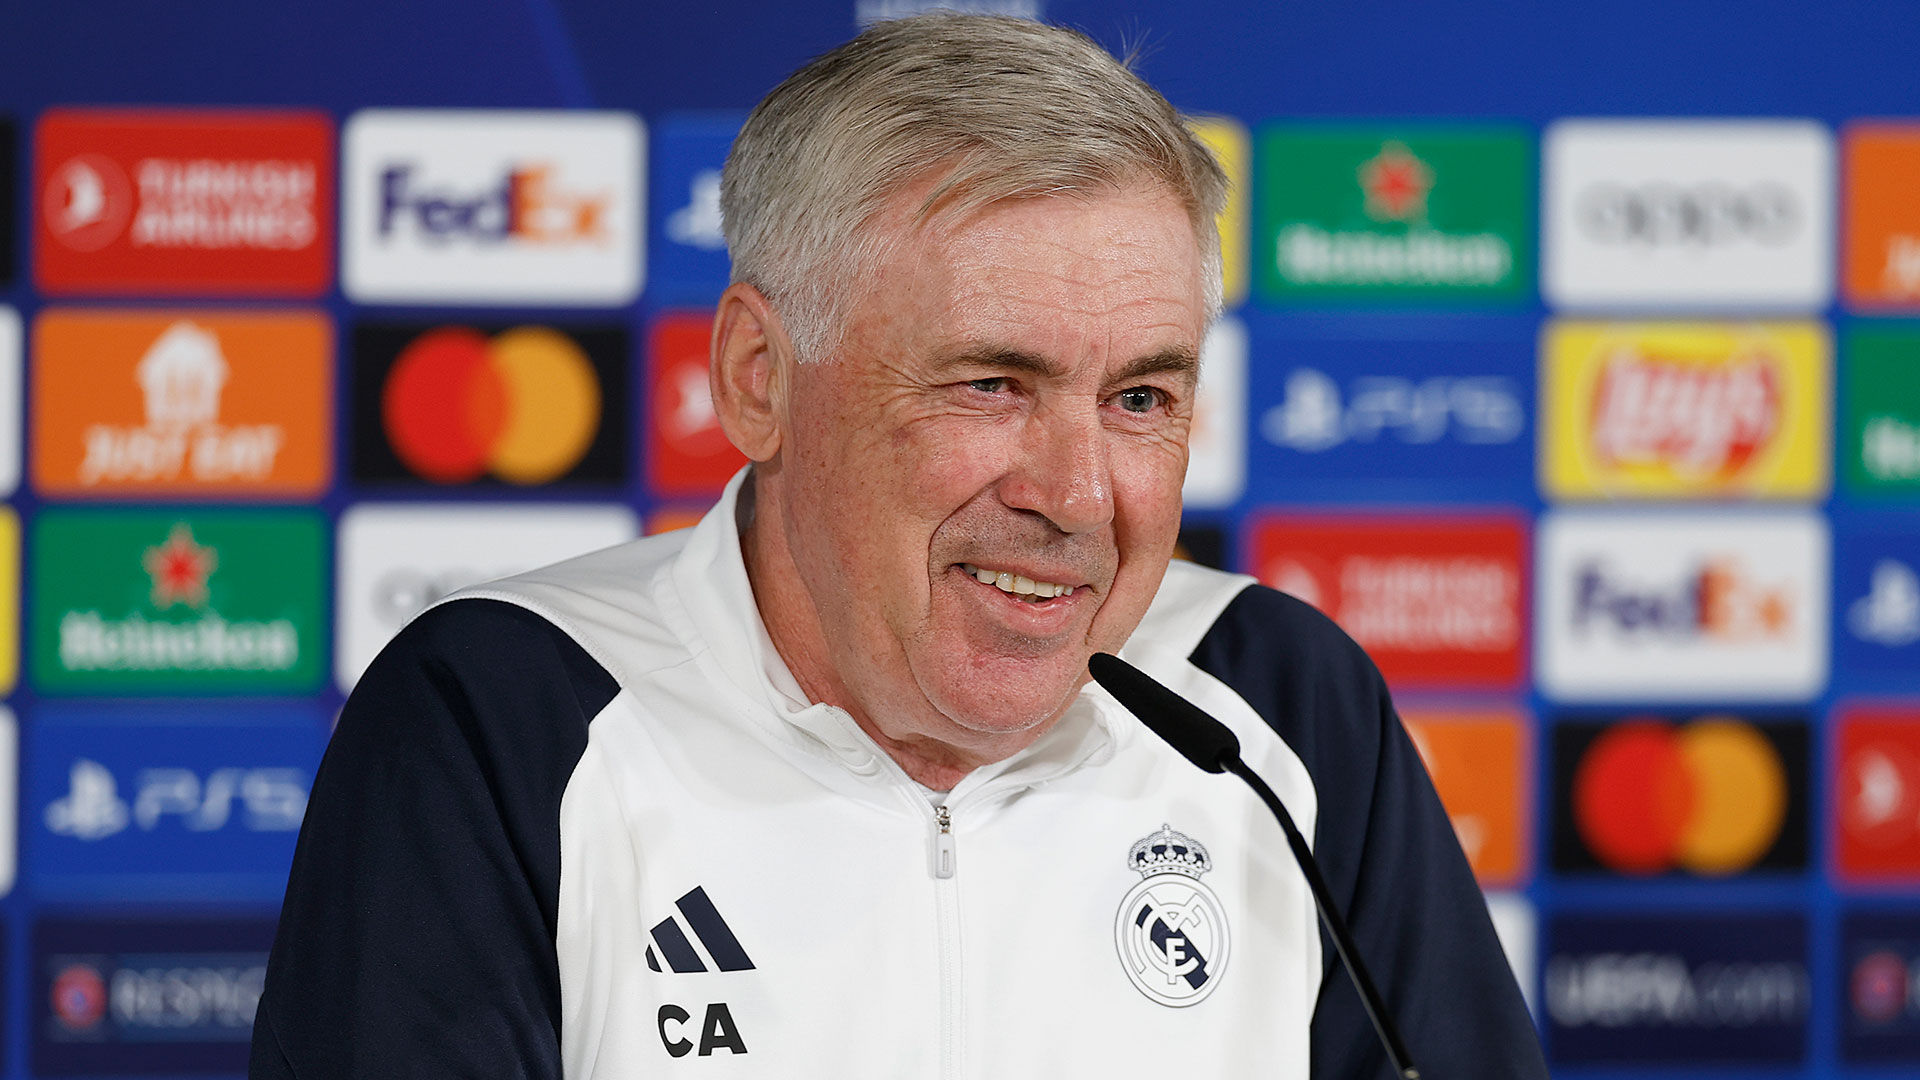 Ancelotti: "We're going to give our best in all areas: mentally, physically and technically"